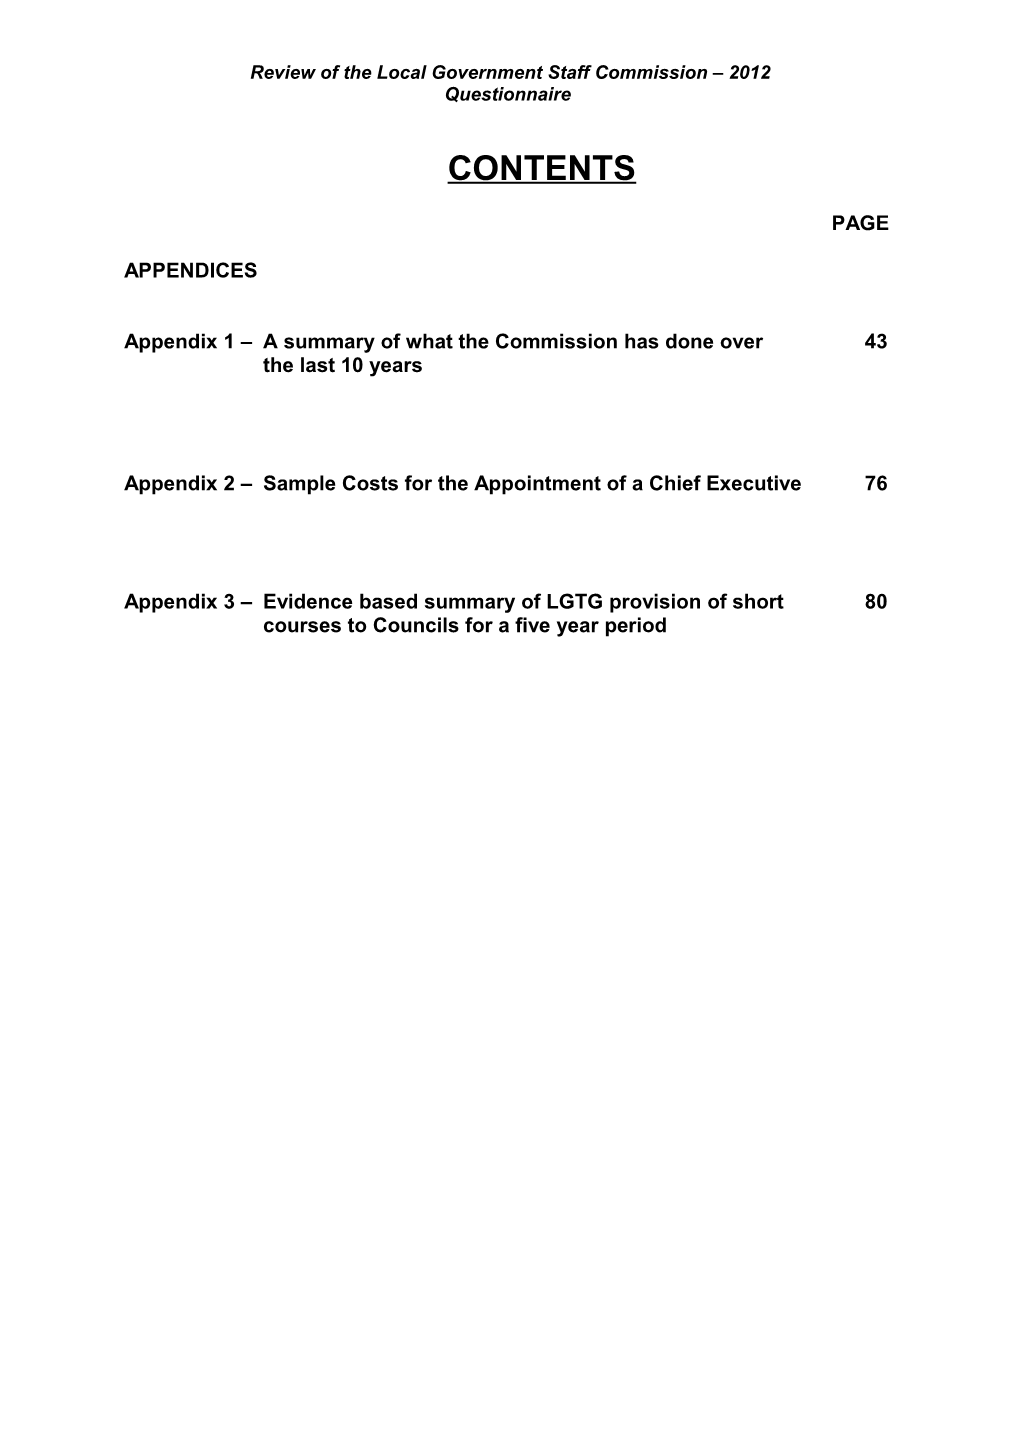 Review of the Local Government Staff Commission 2012